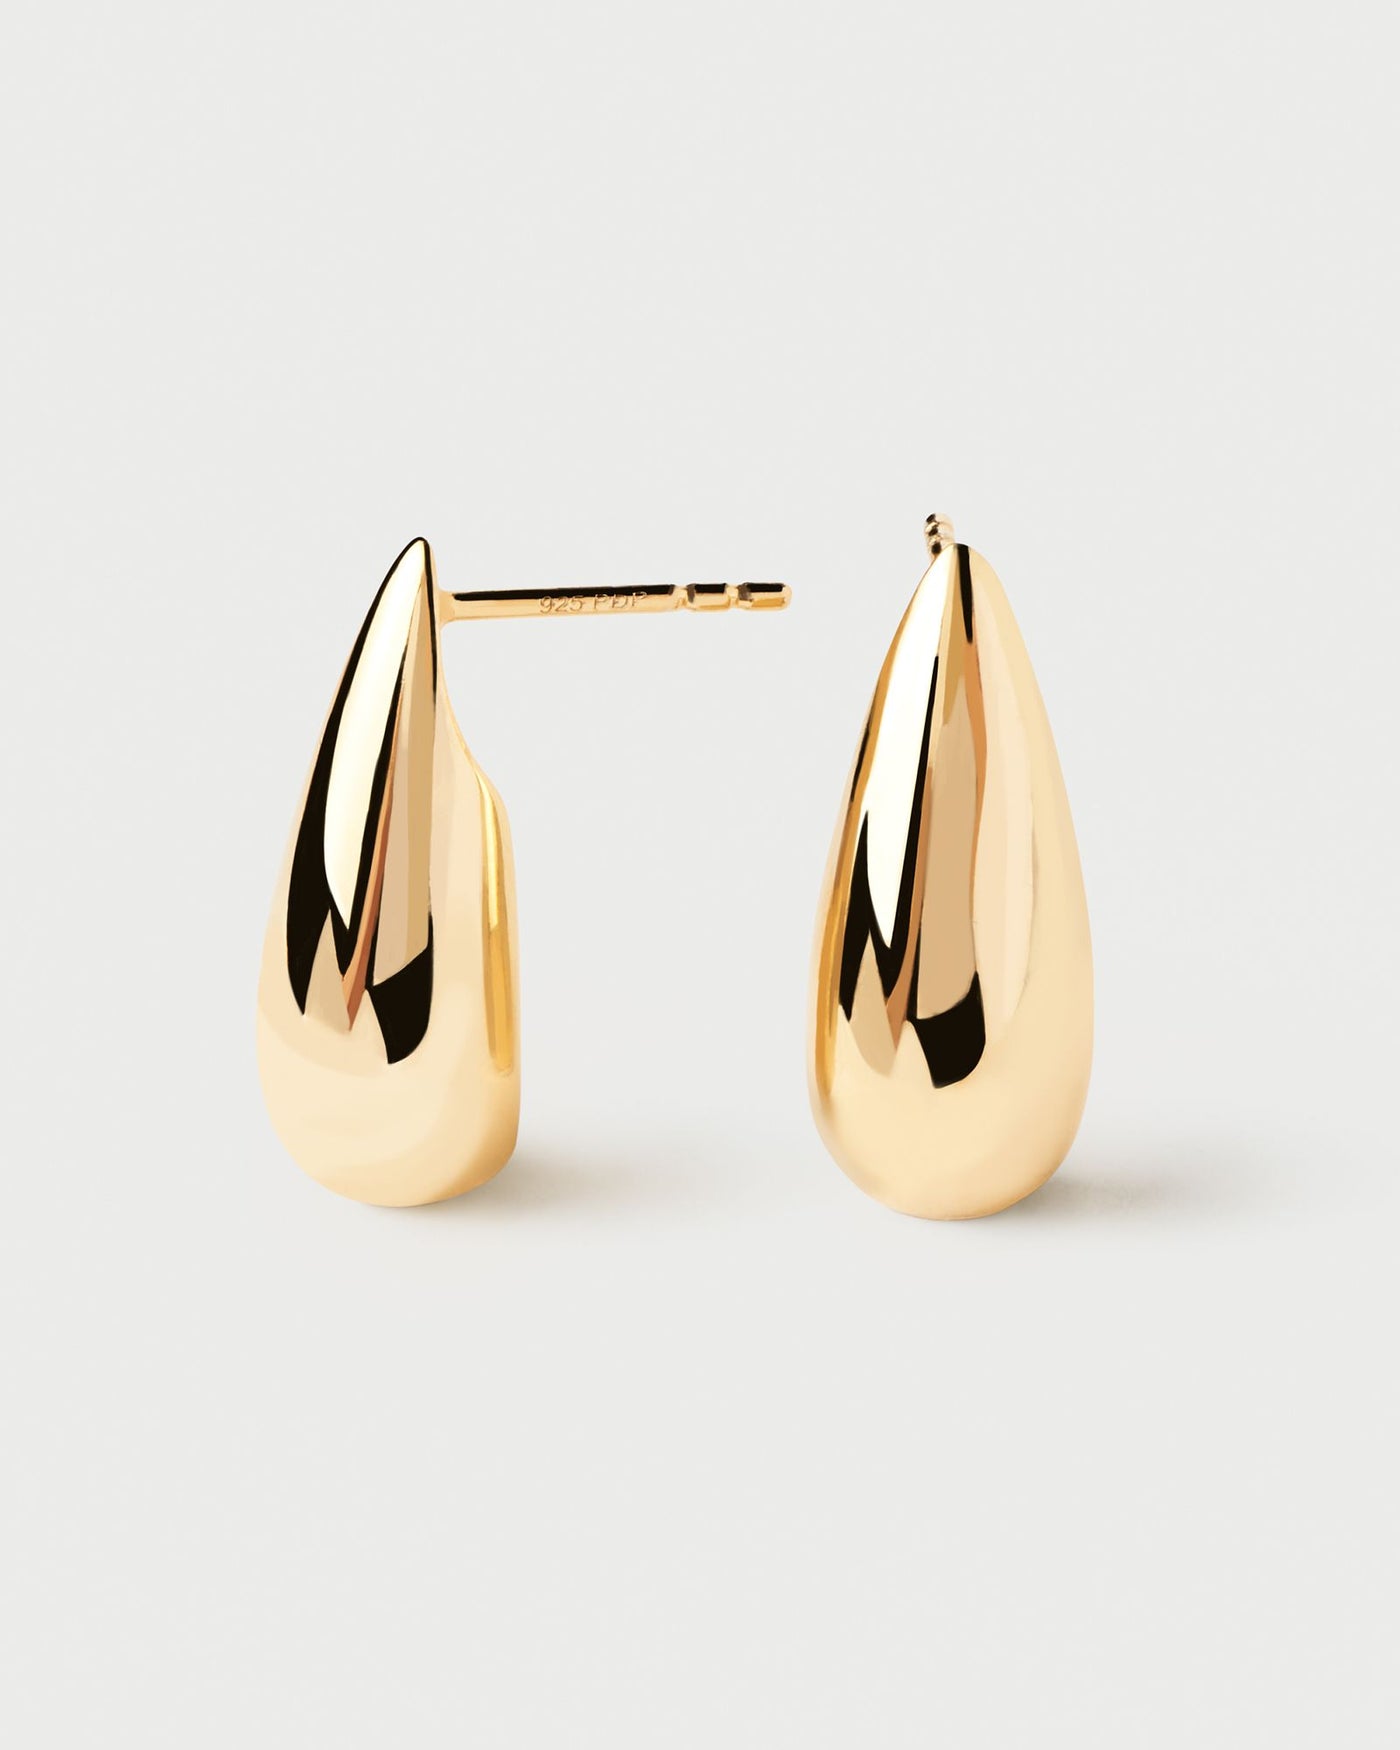 2024 Selection | Large Sugar Earrings. Drop shaped stud earrings in gold-plated silver. Get the latest arrival from PDPAOLA. Place your order safely and get this Best Seller. Free Shipping.